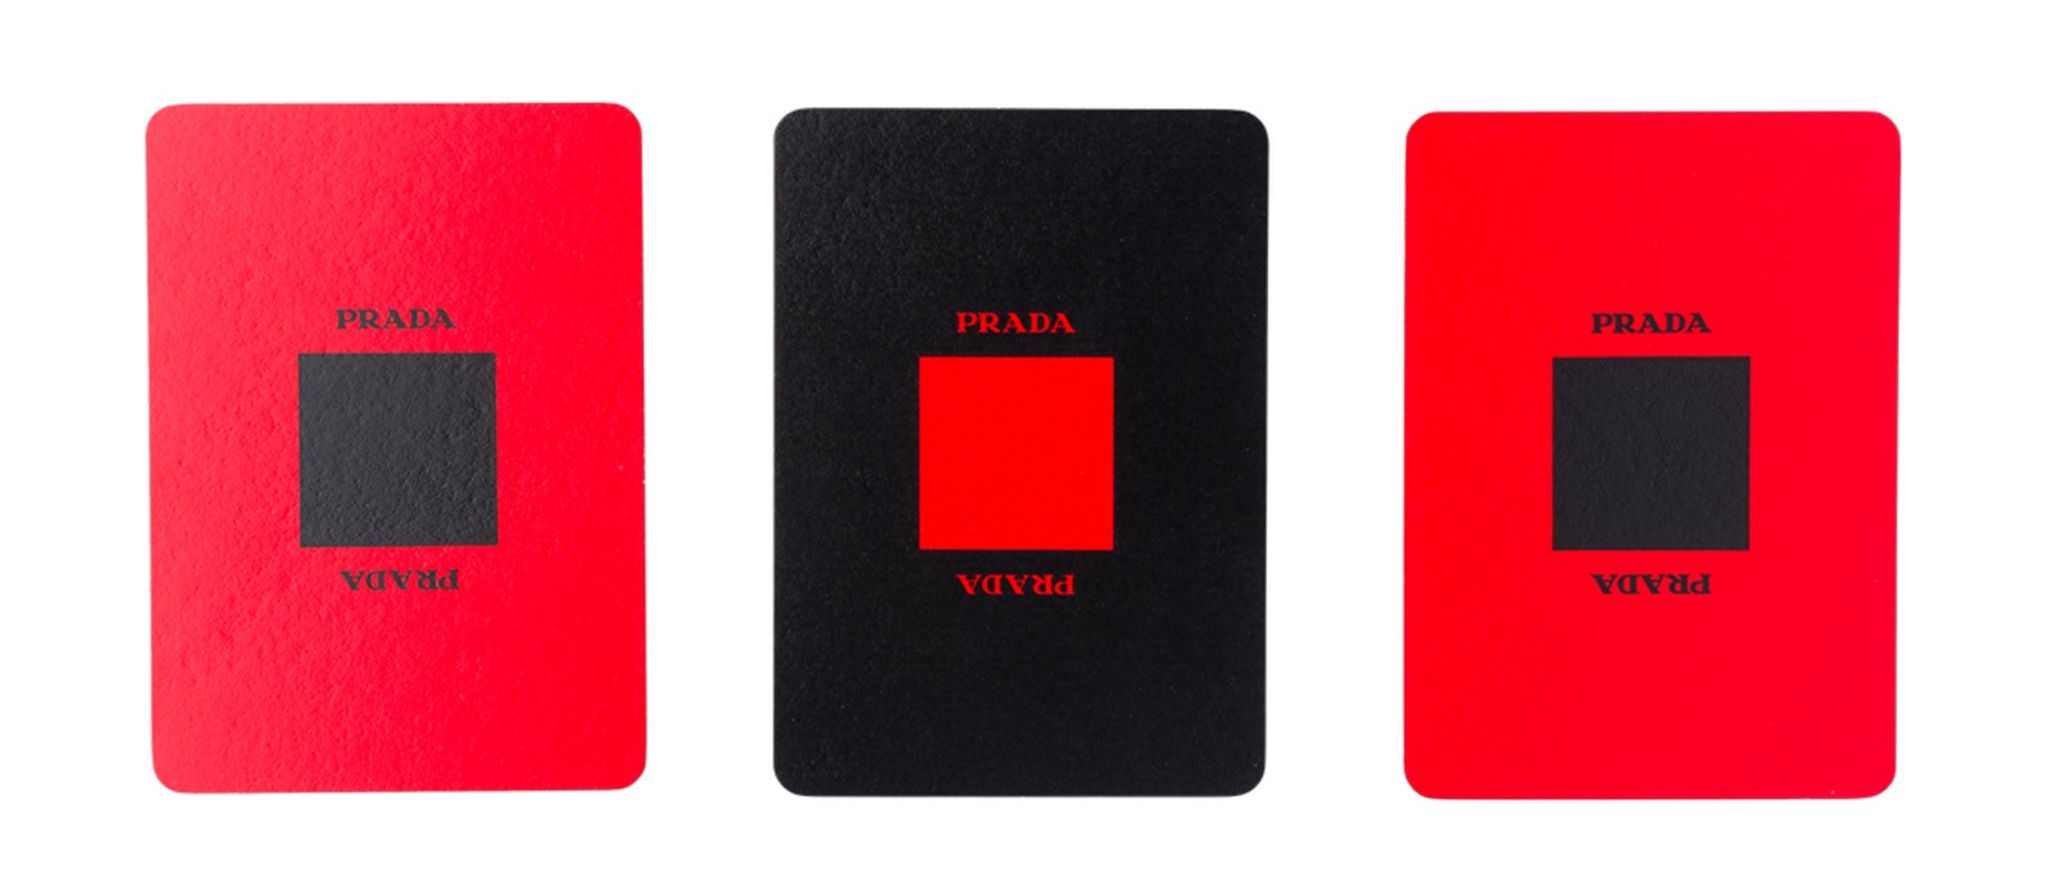 prada playing cards with leather case 16352059 31355271 2048